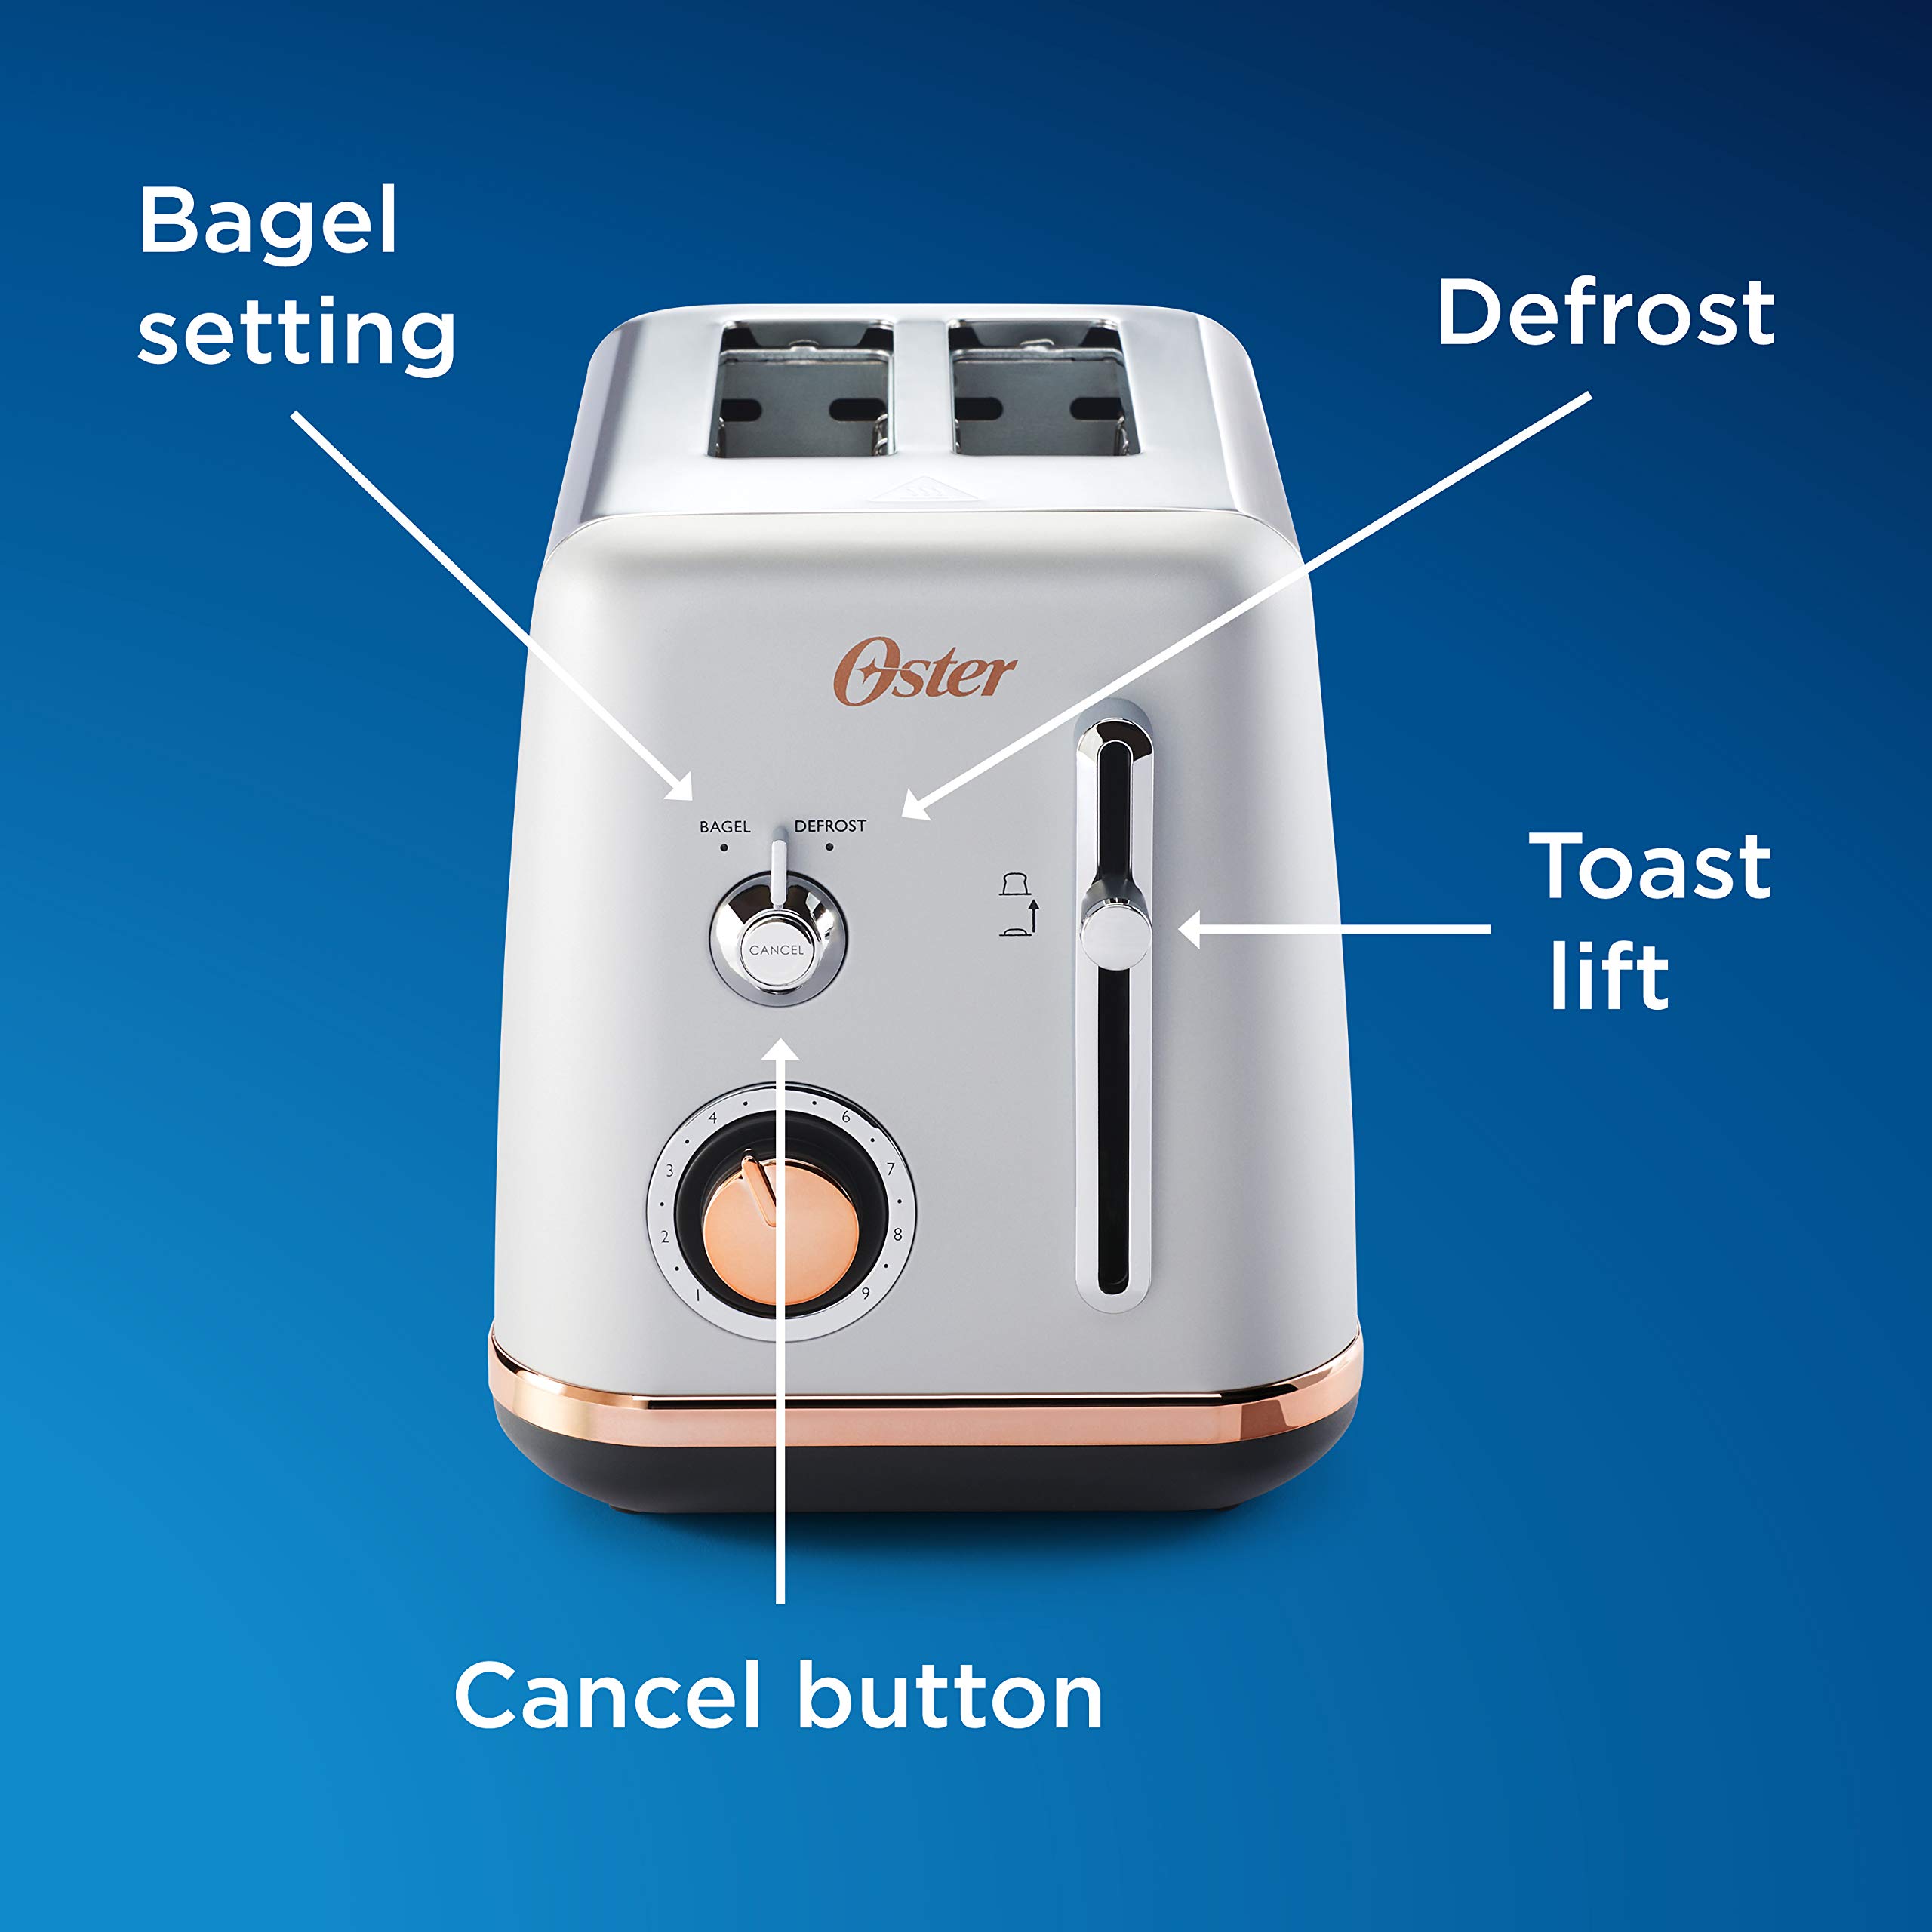 Oster 2097682 2 Slice Toaster Metropolitan Collection with Rose Gold Accents, GRAY